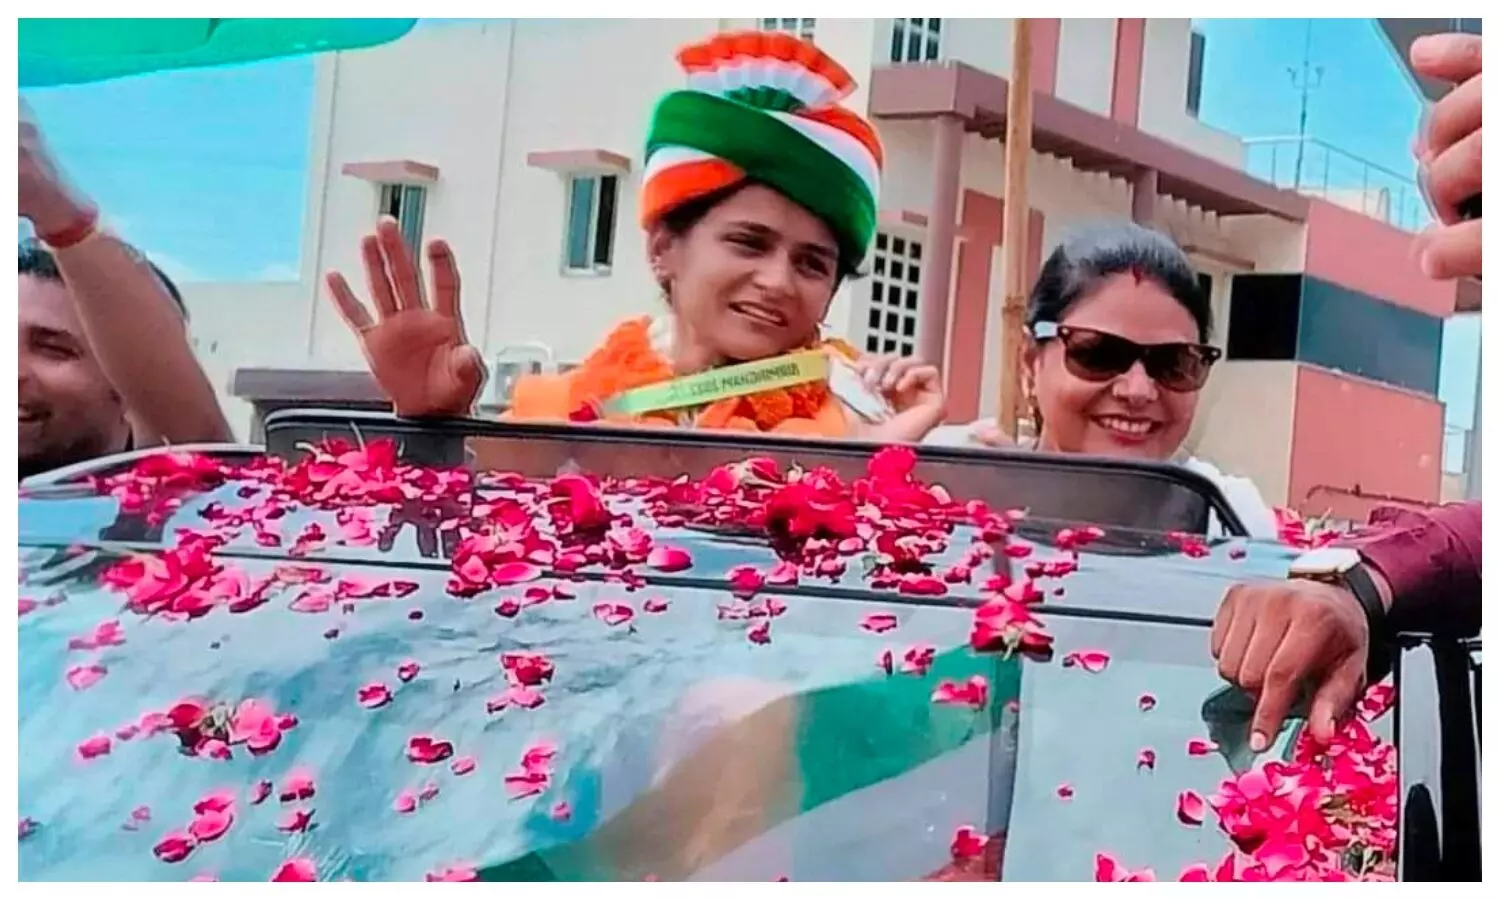 Commonwealth Silver Medalist Priyanka Goswami received warm welcome in Meerut